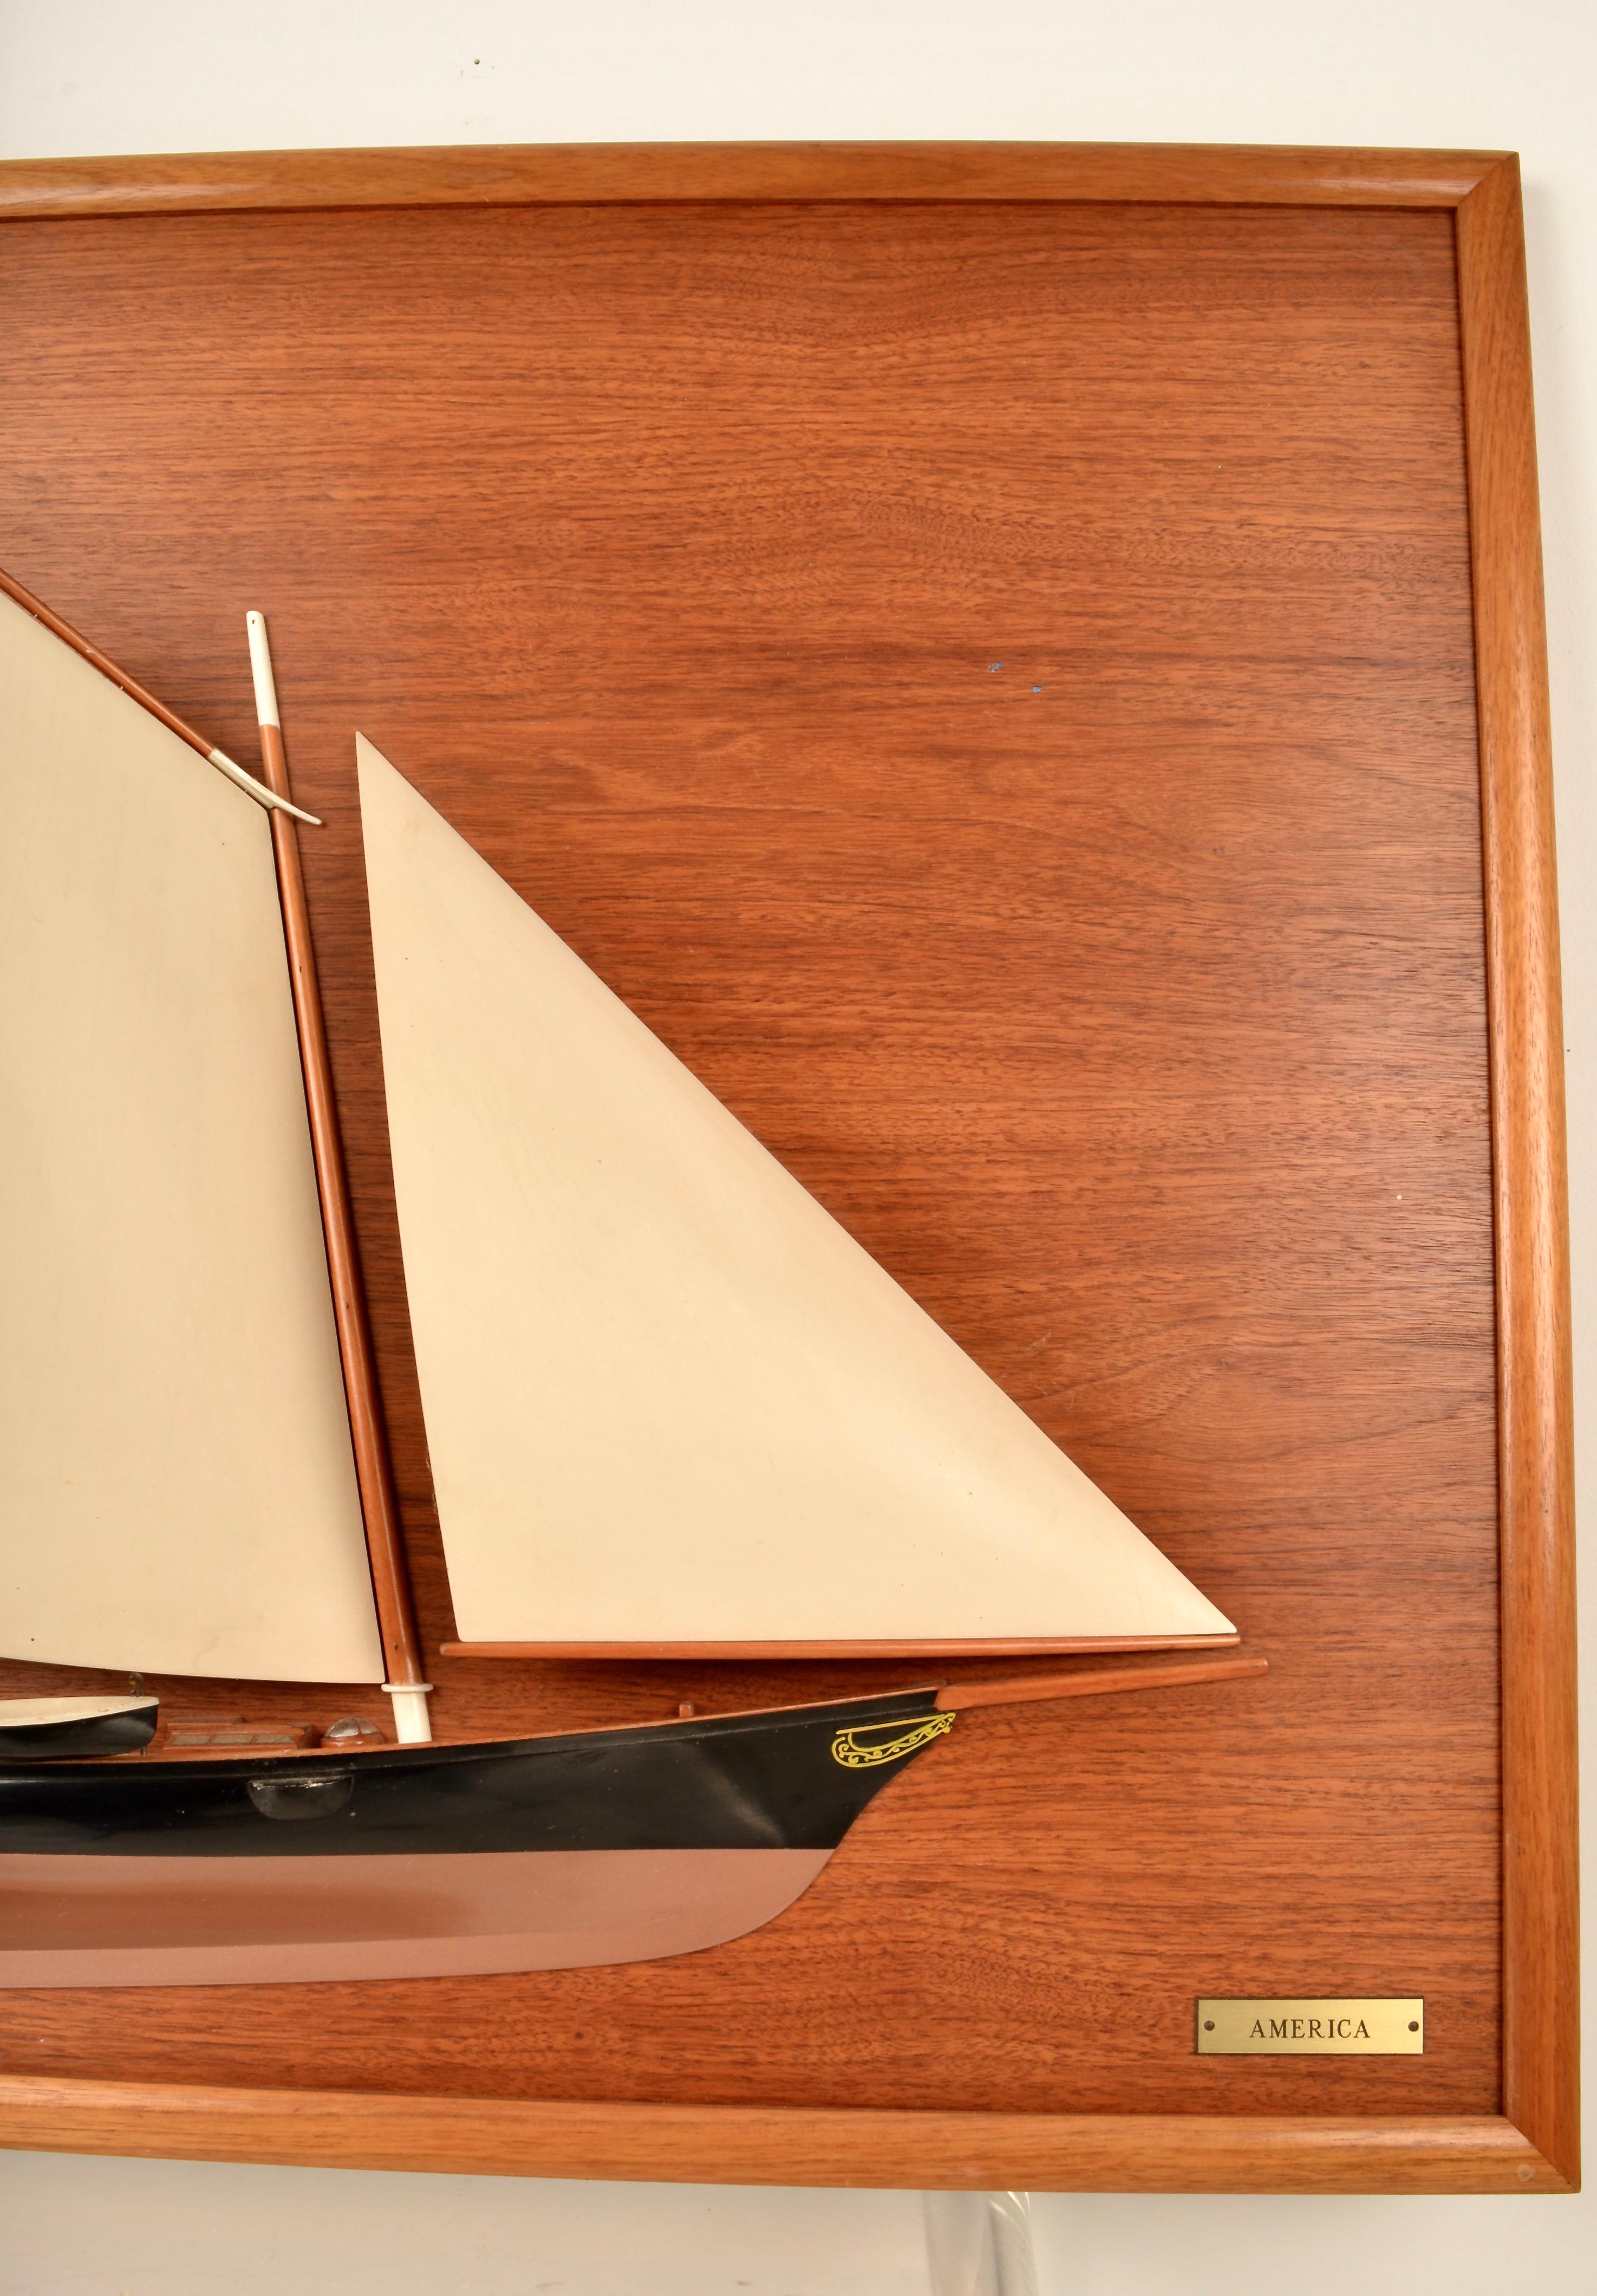 American Classical Rigged Half Model of the Schooner Yacht America